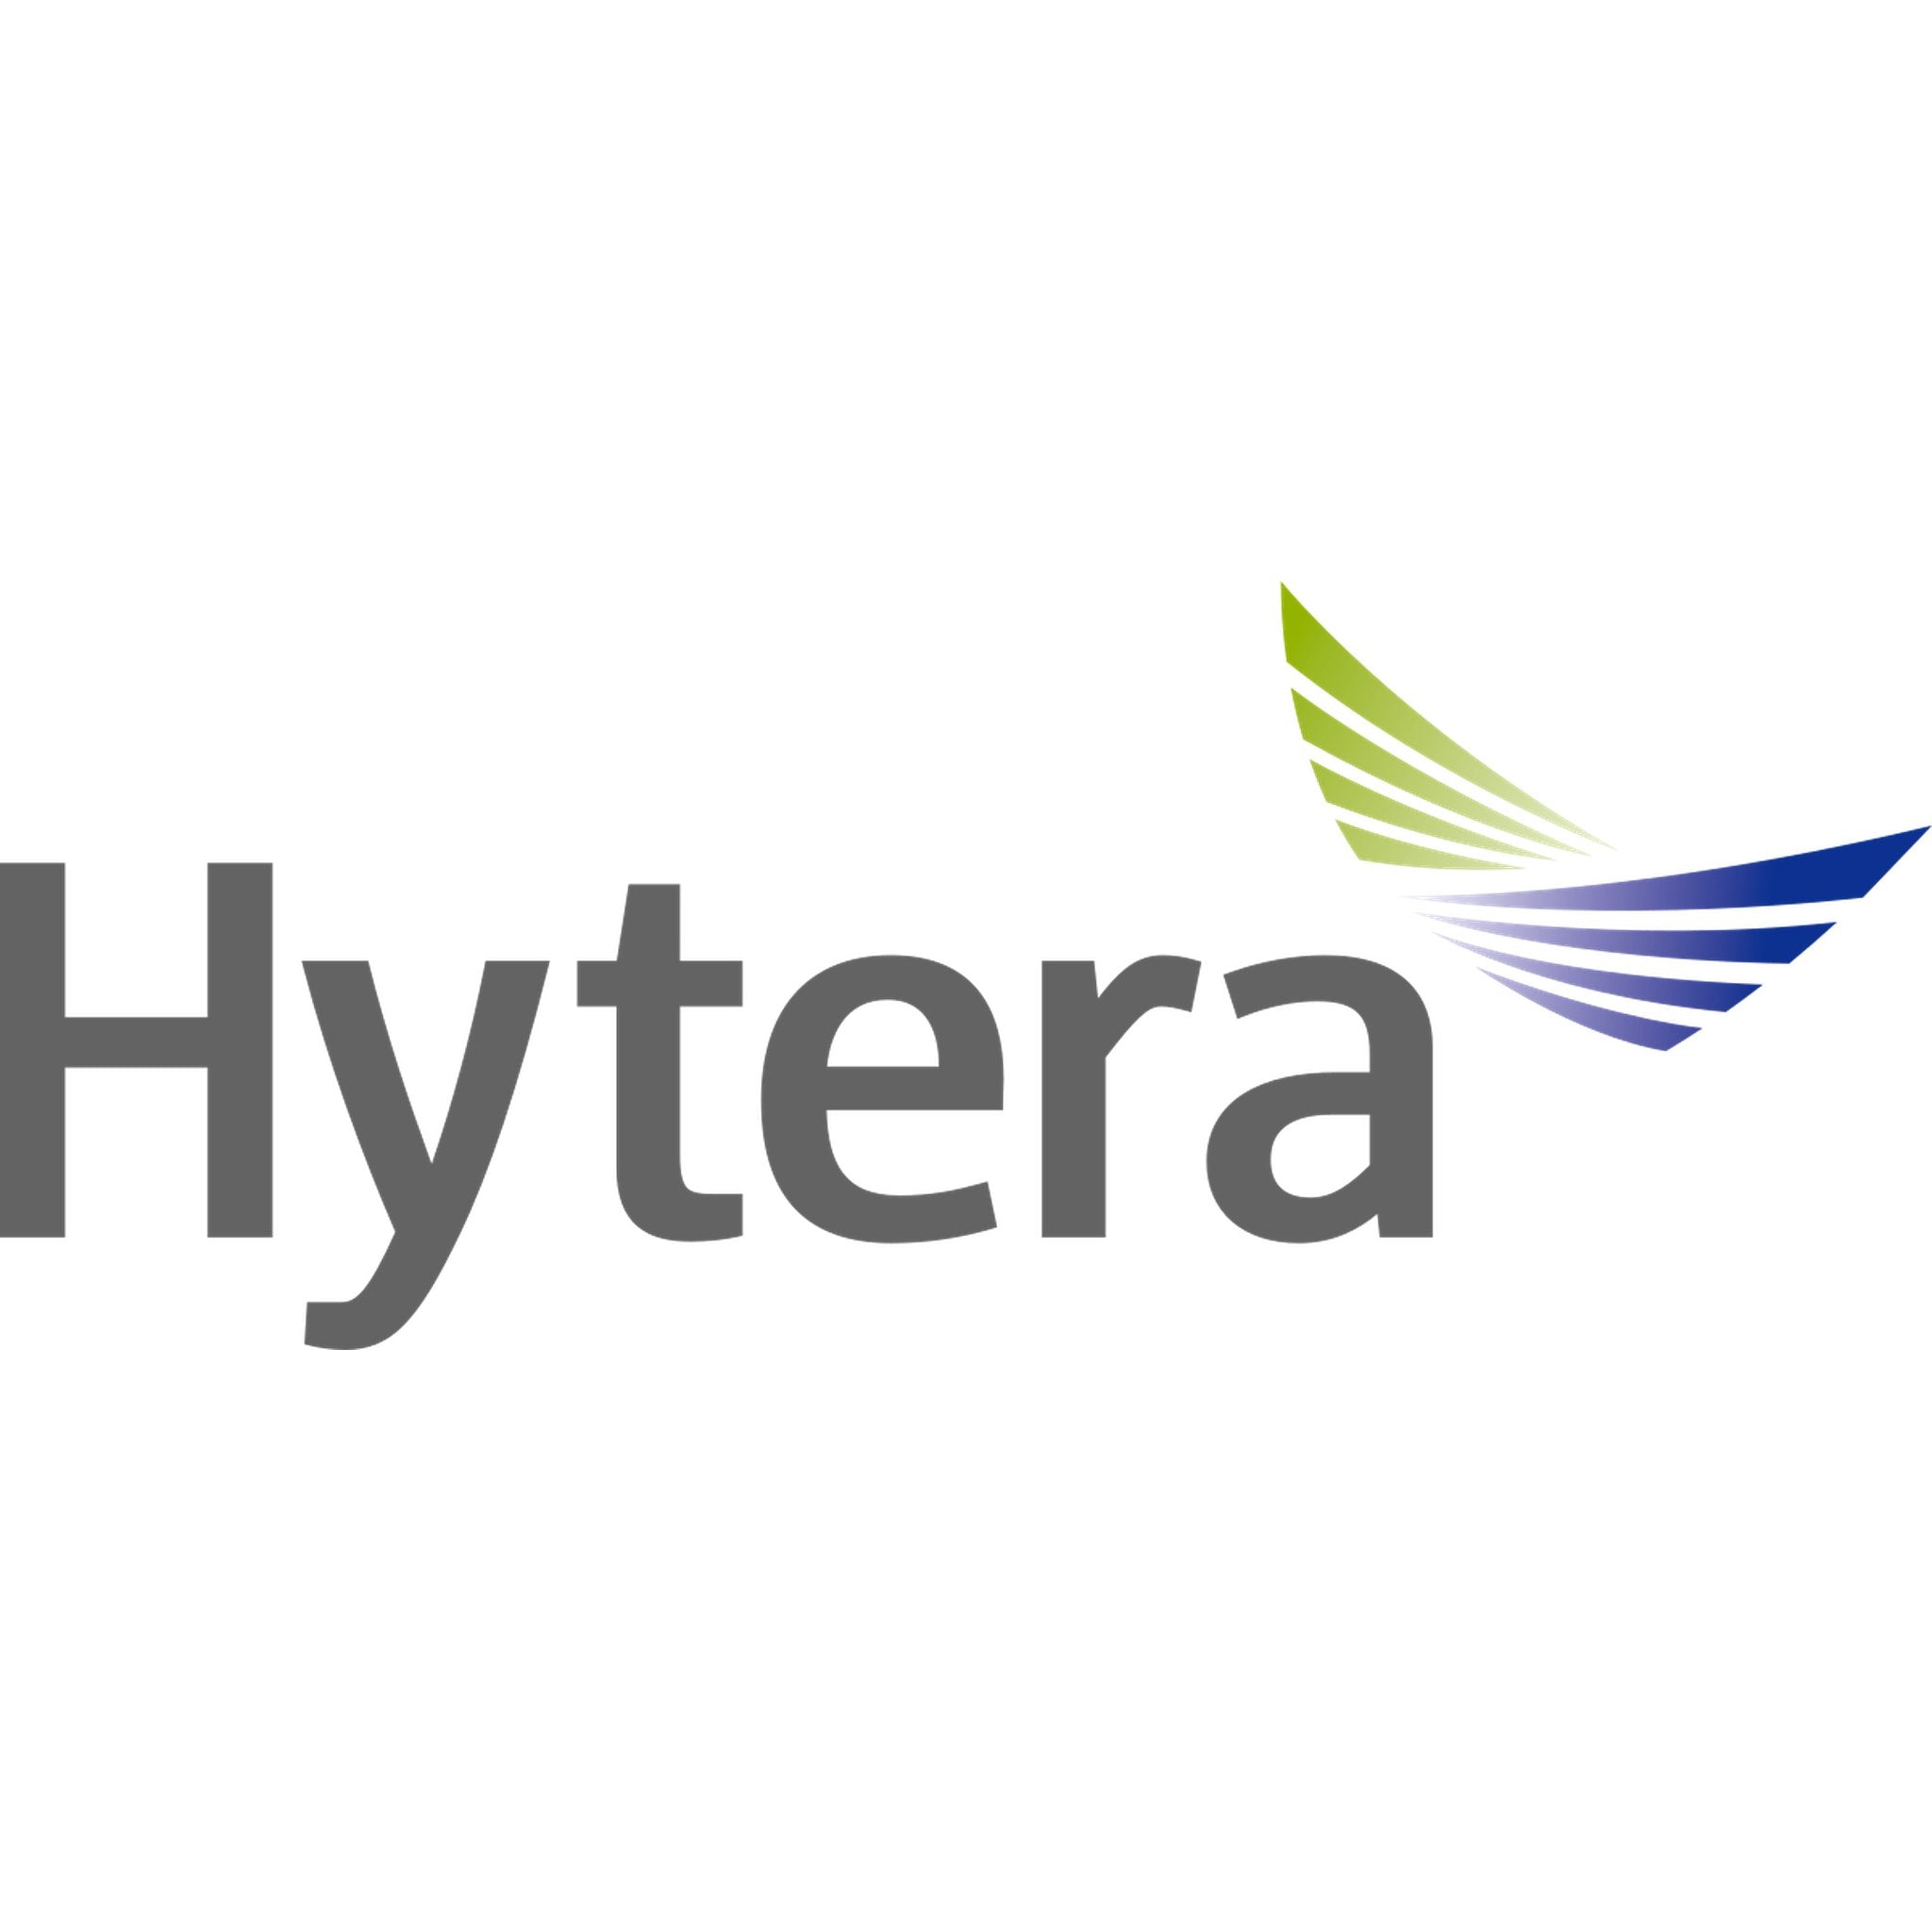 Hytera DT-13010100000031 Multi-Site XPT License (upgrade from single site) for Repeater - Atlantic Radio Communications Corp.